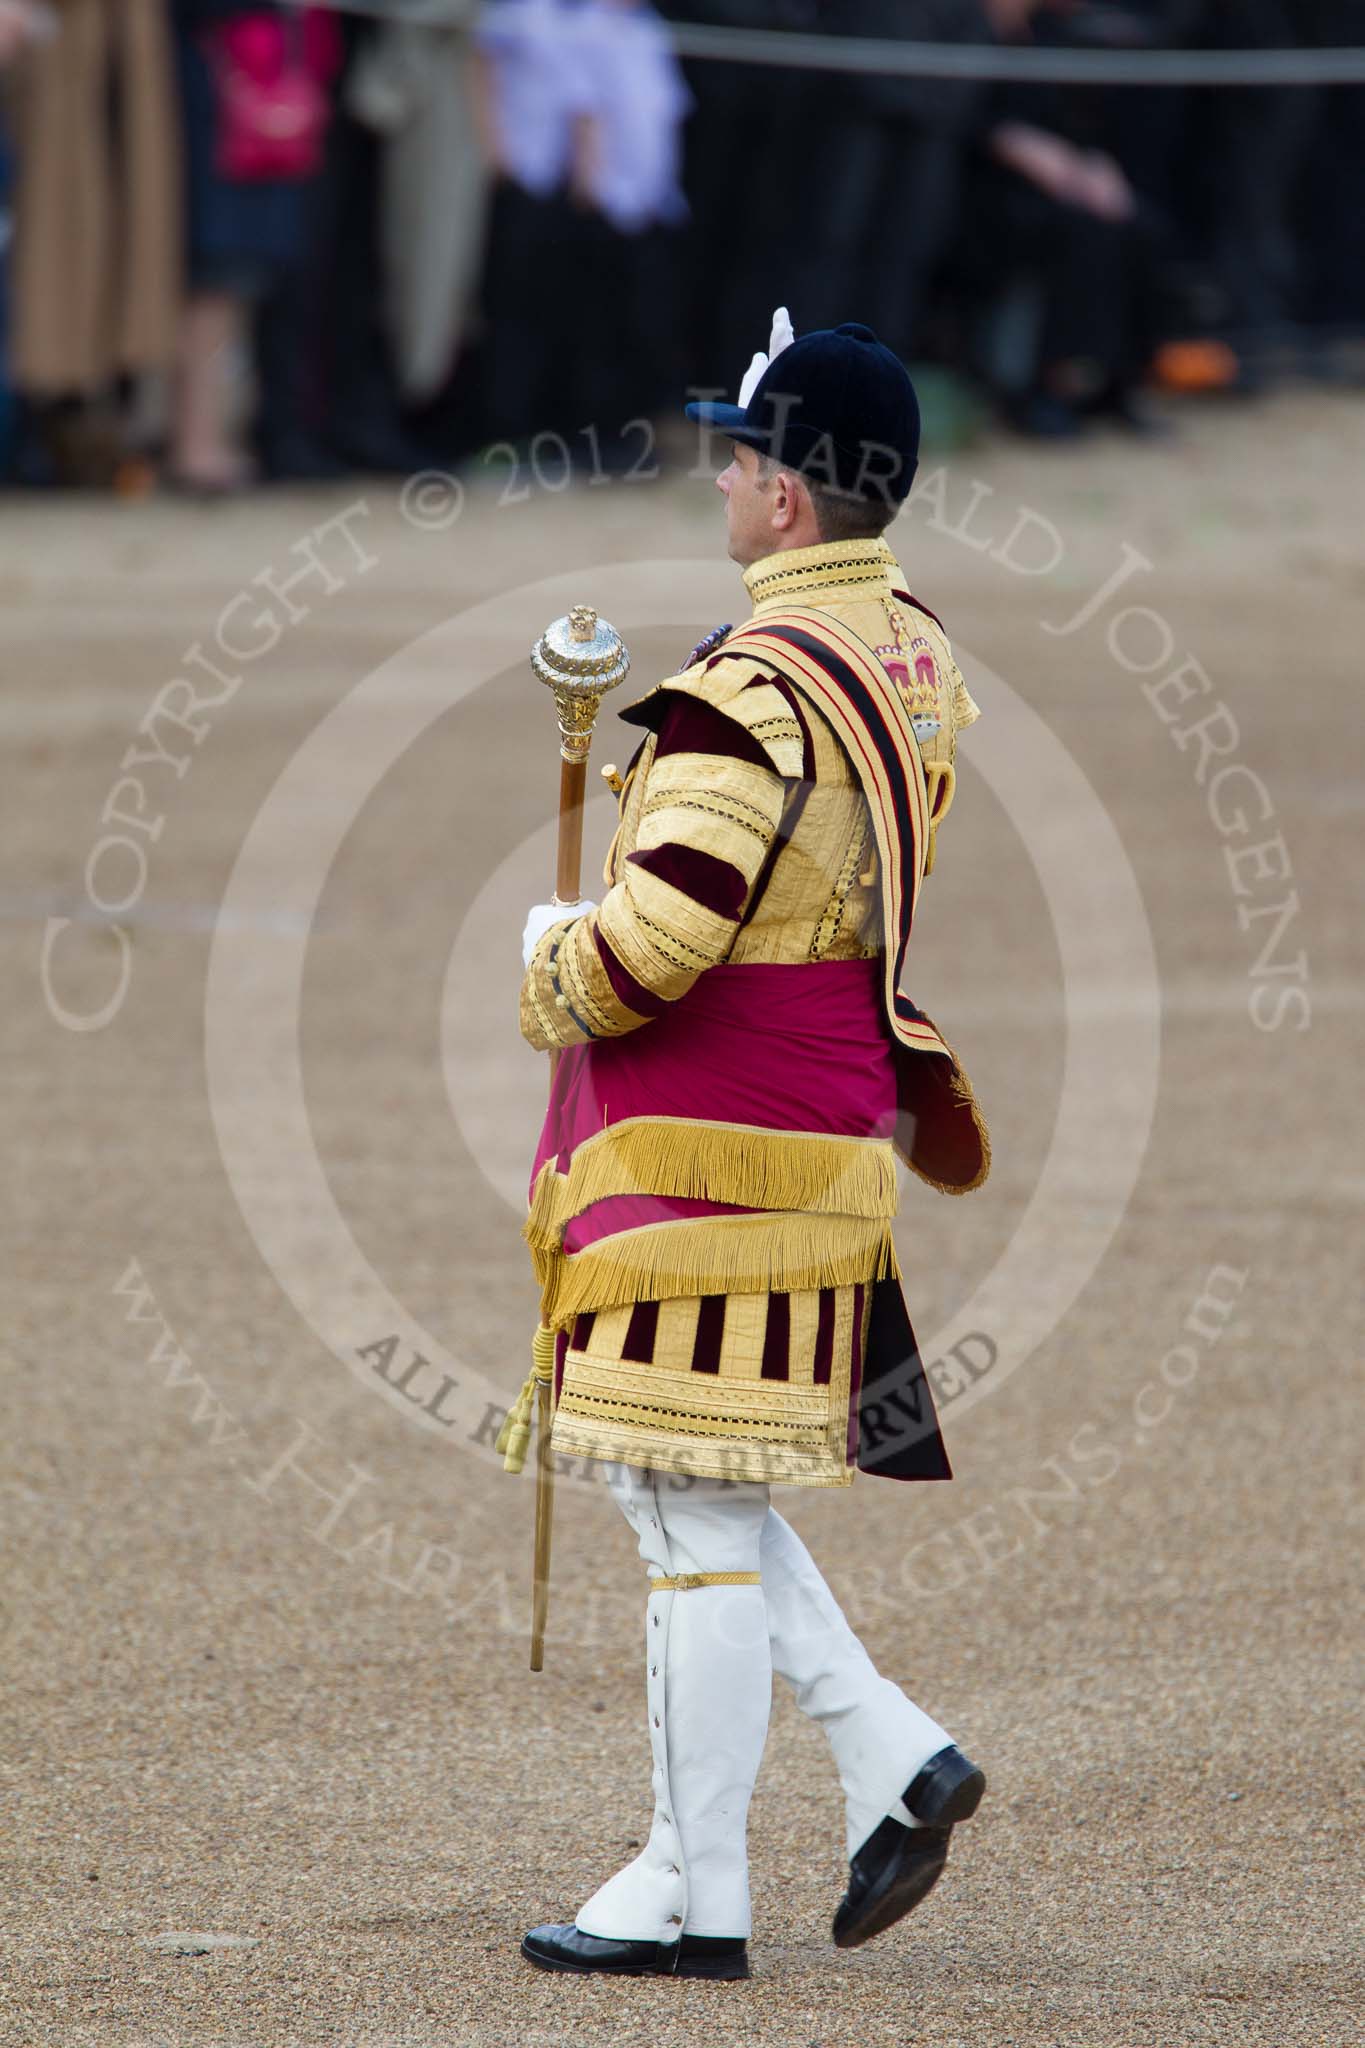 Trooping the Colour 2012: Senior Drum Major M Betts, Grenadier Guards, leading the Band of the Welsh Guards into their initial position on Horse Guards Parade..
Horse Guards Parade, Westminster,
London SW1,

United Kingdom,
on 16 June 2012 at 10:14, image #25